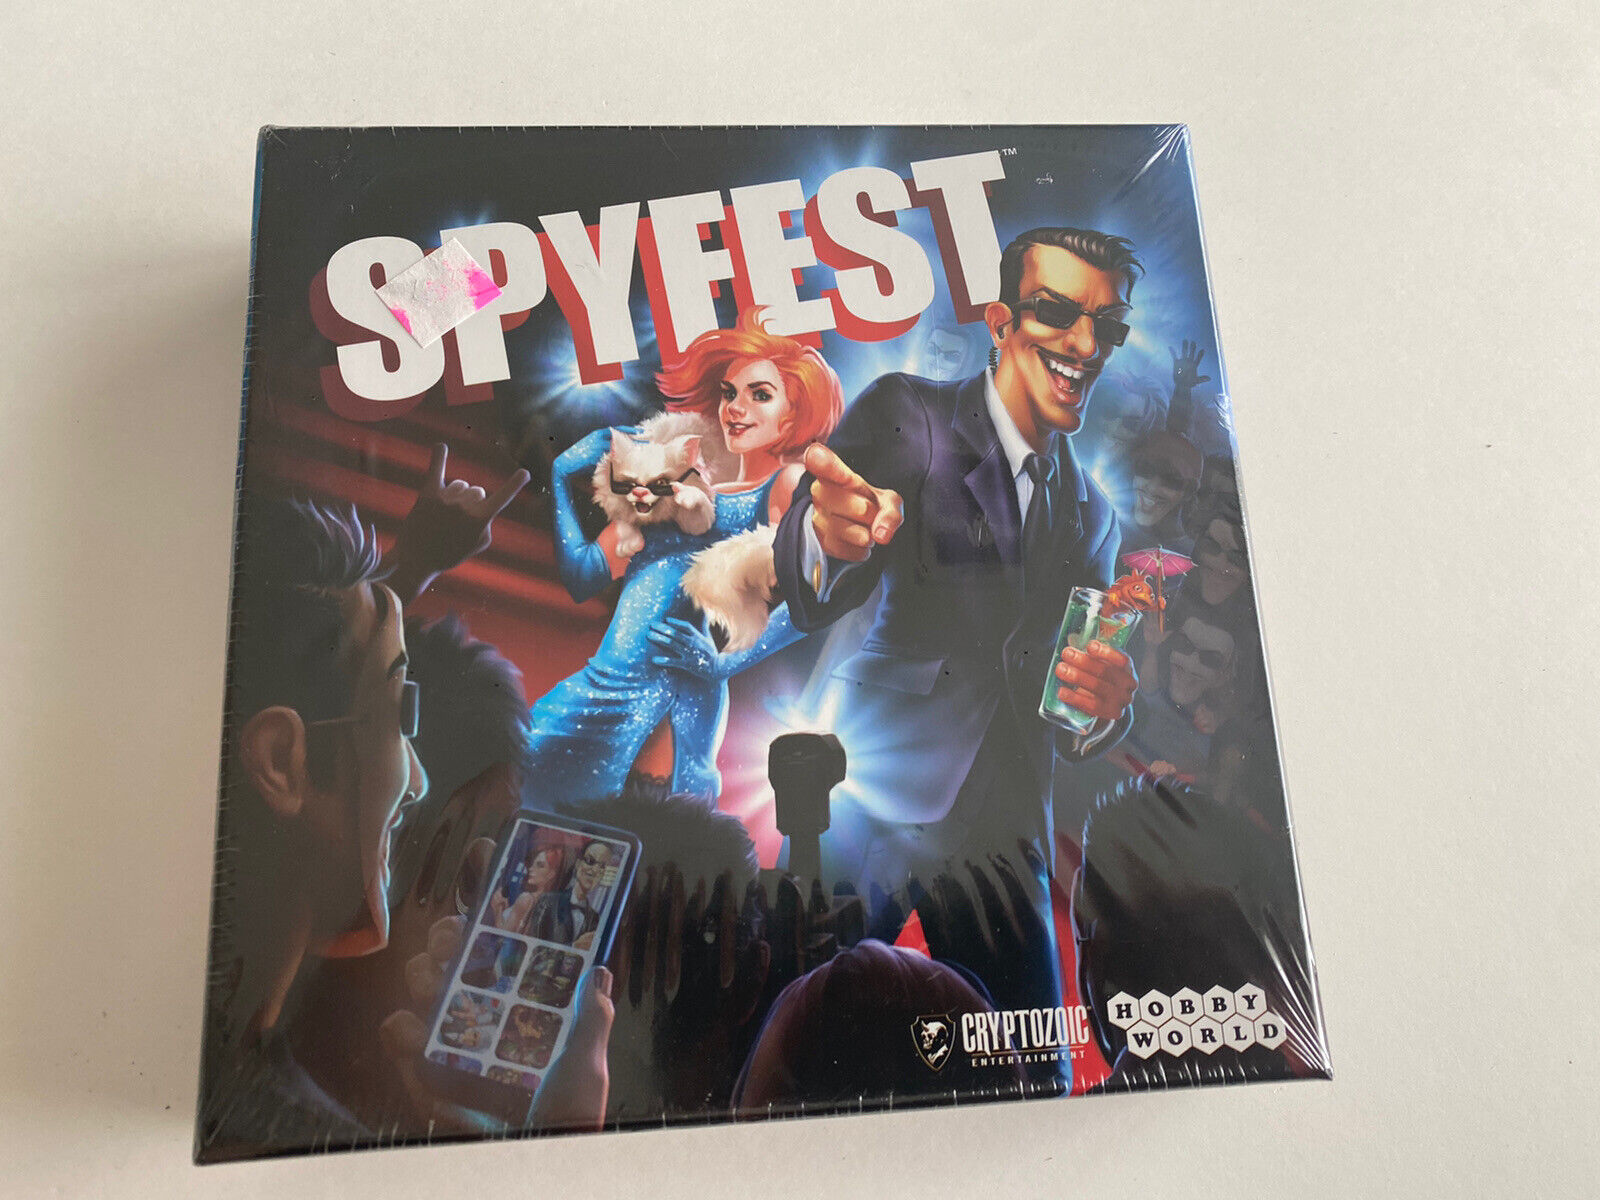 Cryptozoic Entertainment: Spyfest - The Perfect Party Game, New, Free Shipping